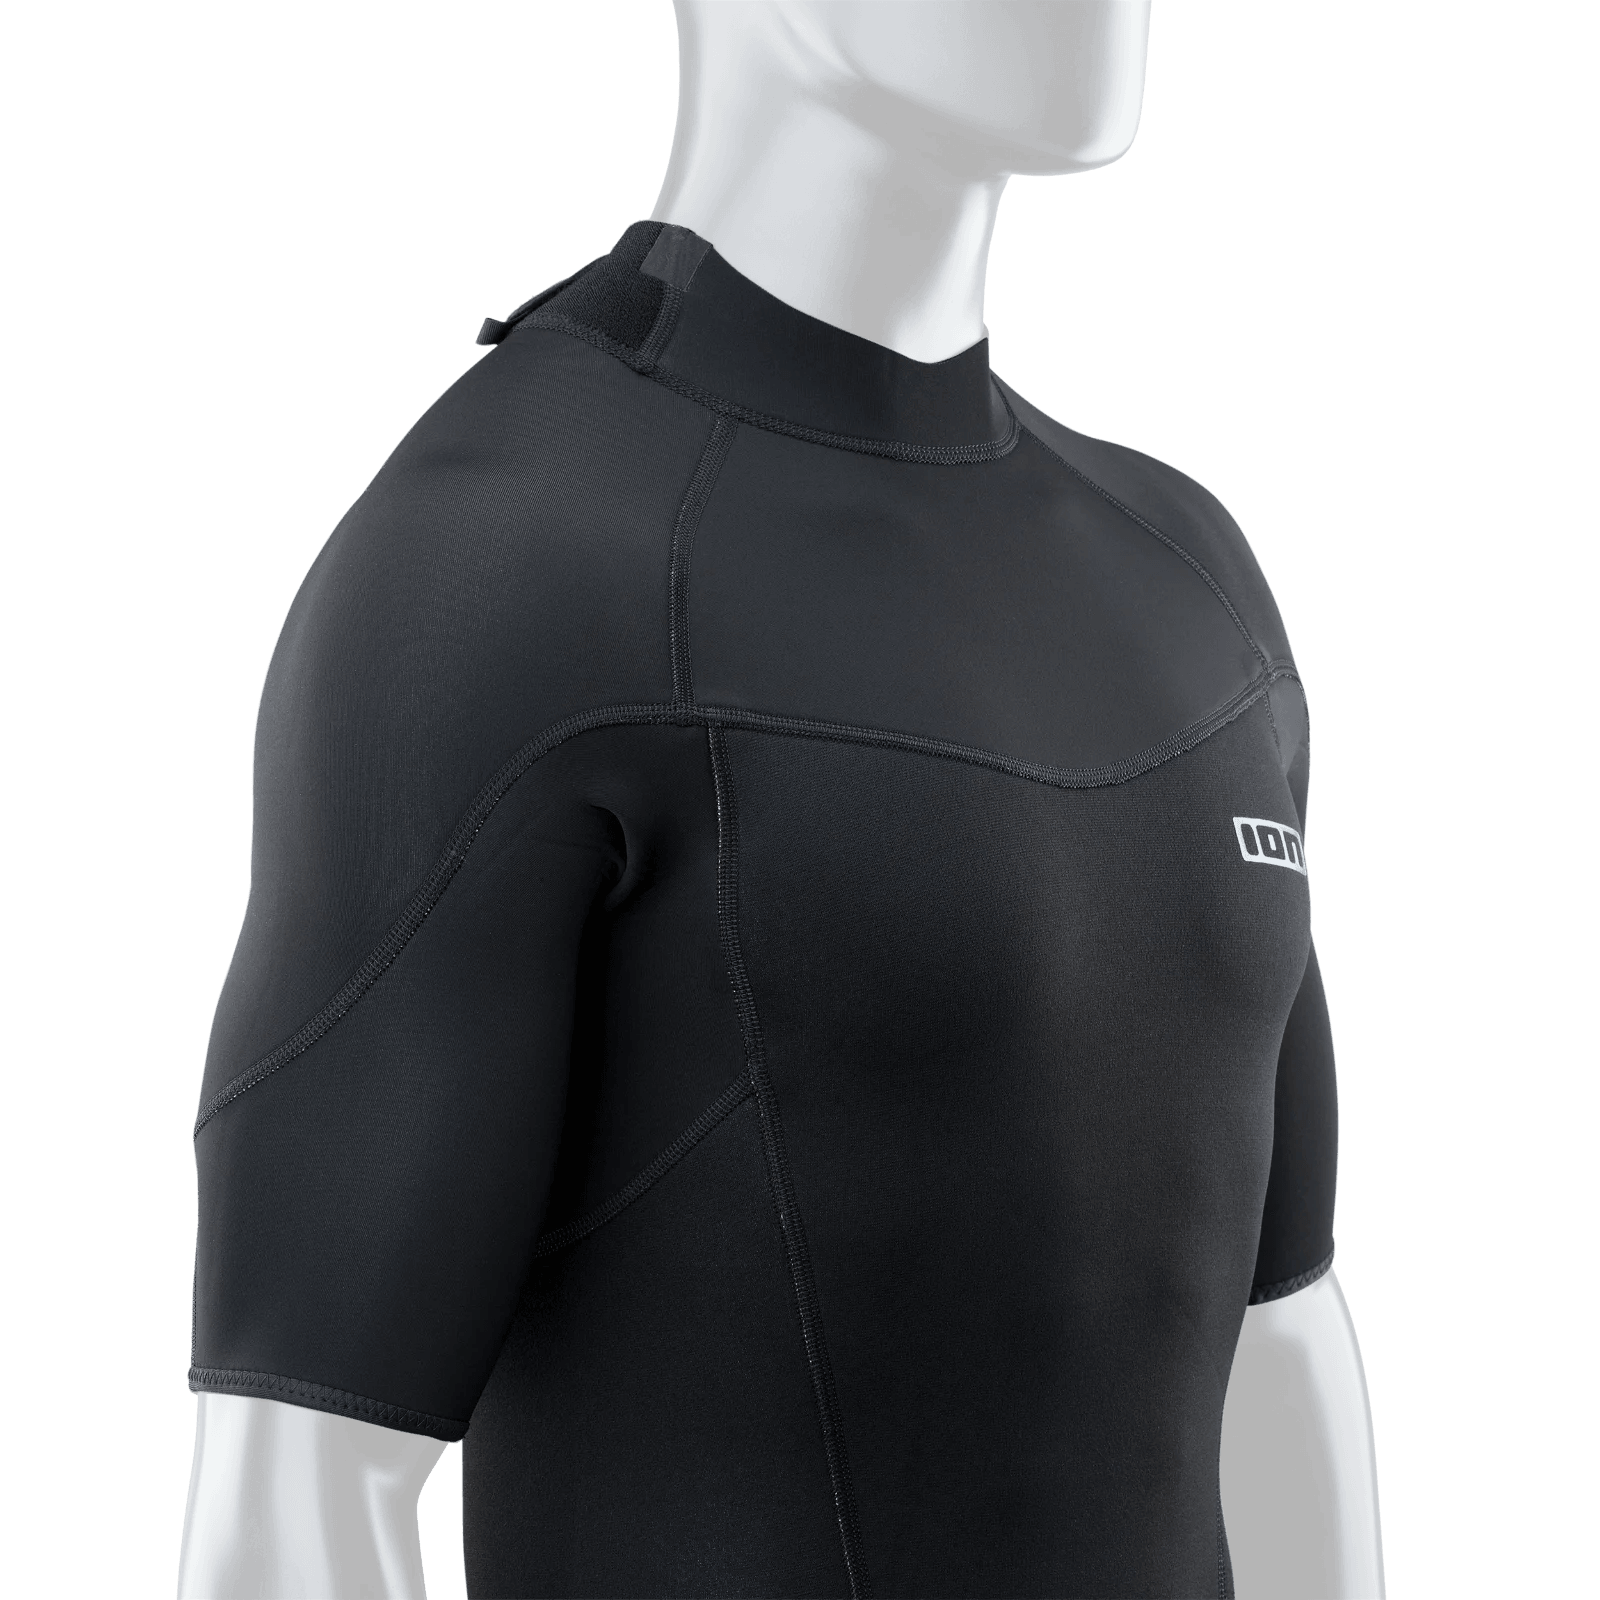 ION ELEMENT 2/2 SHORTY LS BACK ZIP - Poole Harbour Watersports